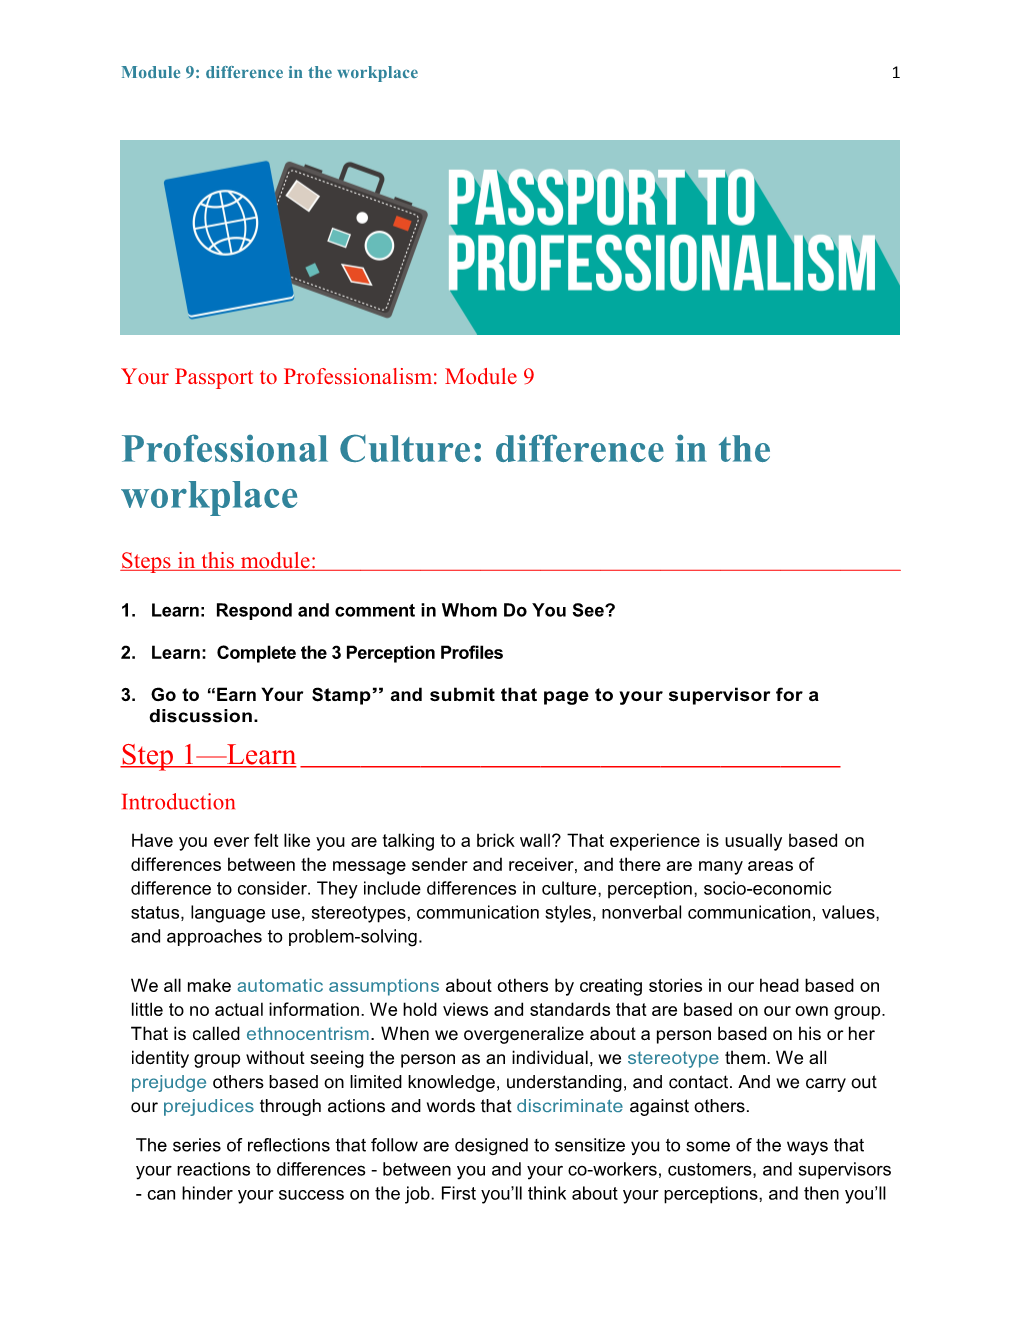 Professional Culture: Difference in the Workplace